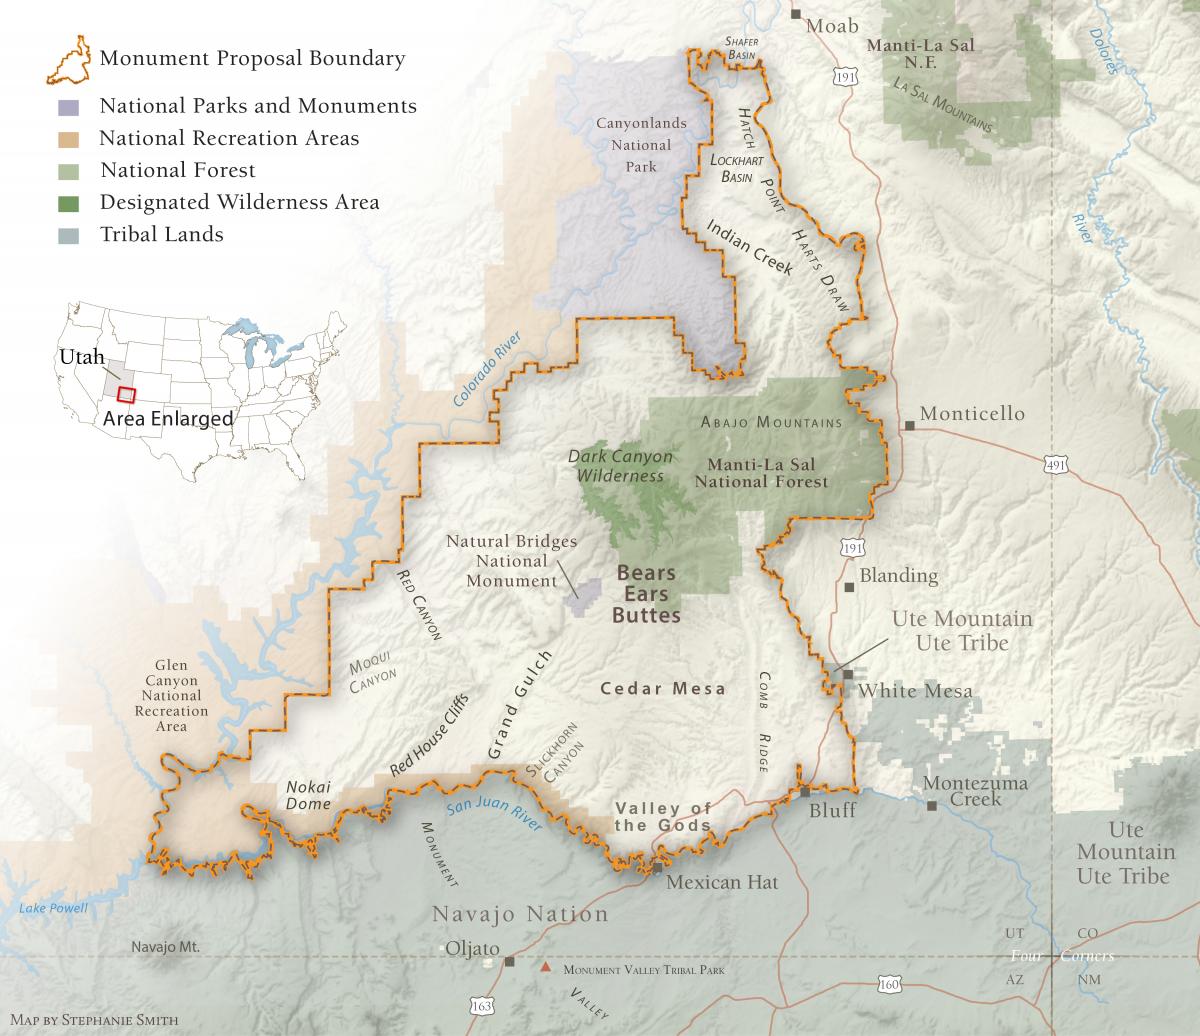 America's largest unprotected cultural landscape, the Bears Ears